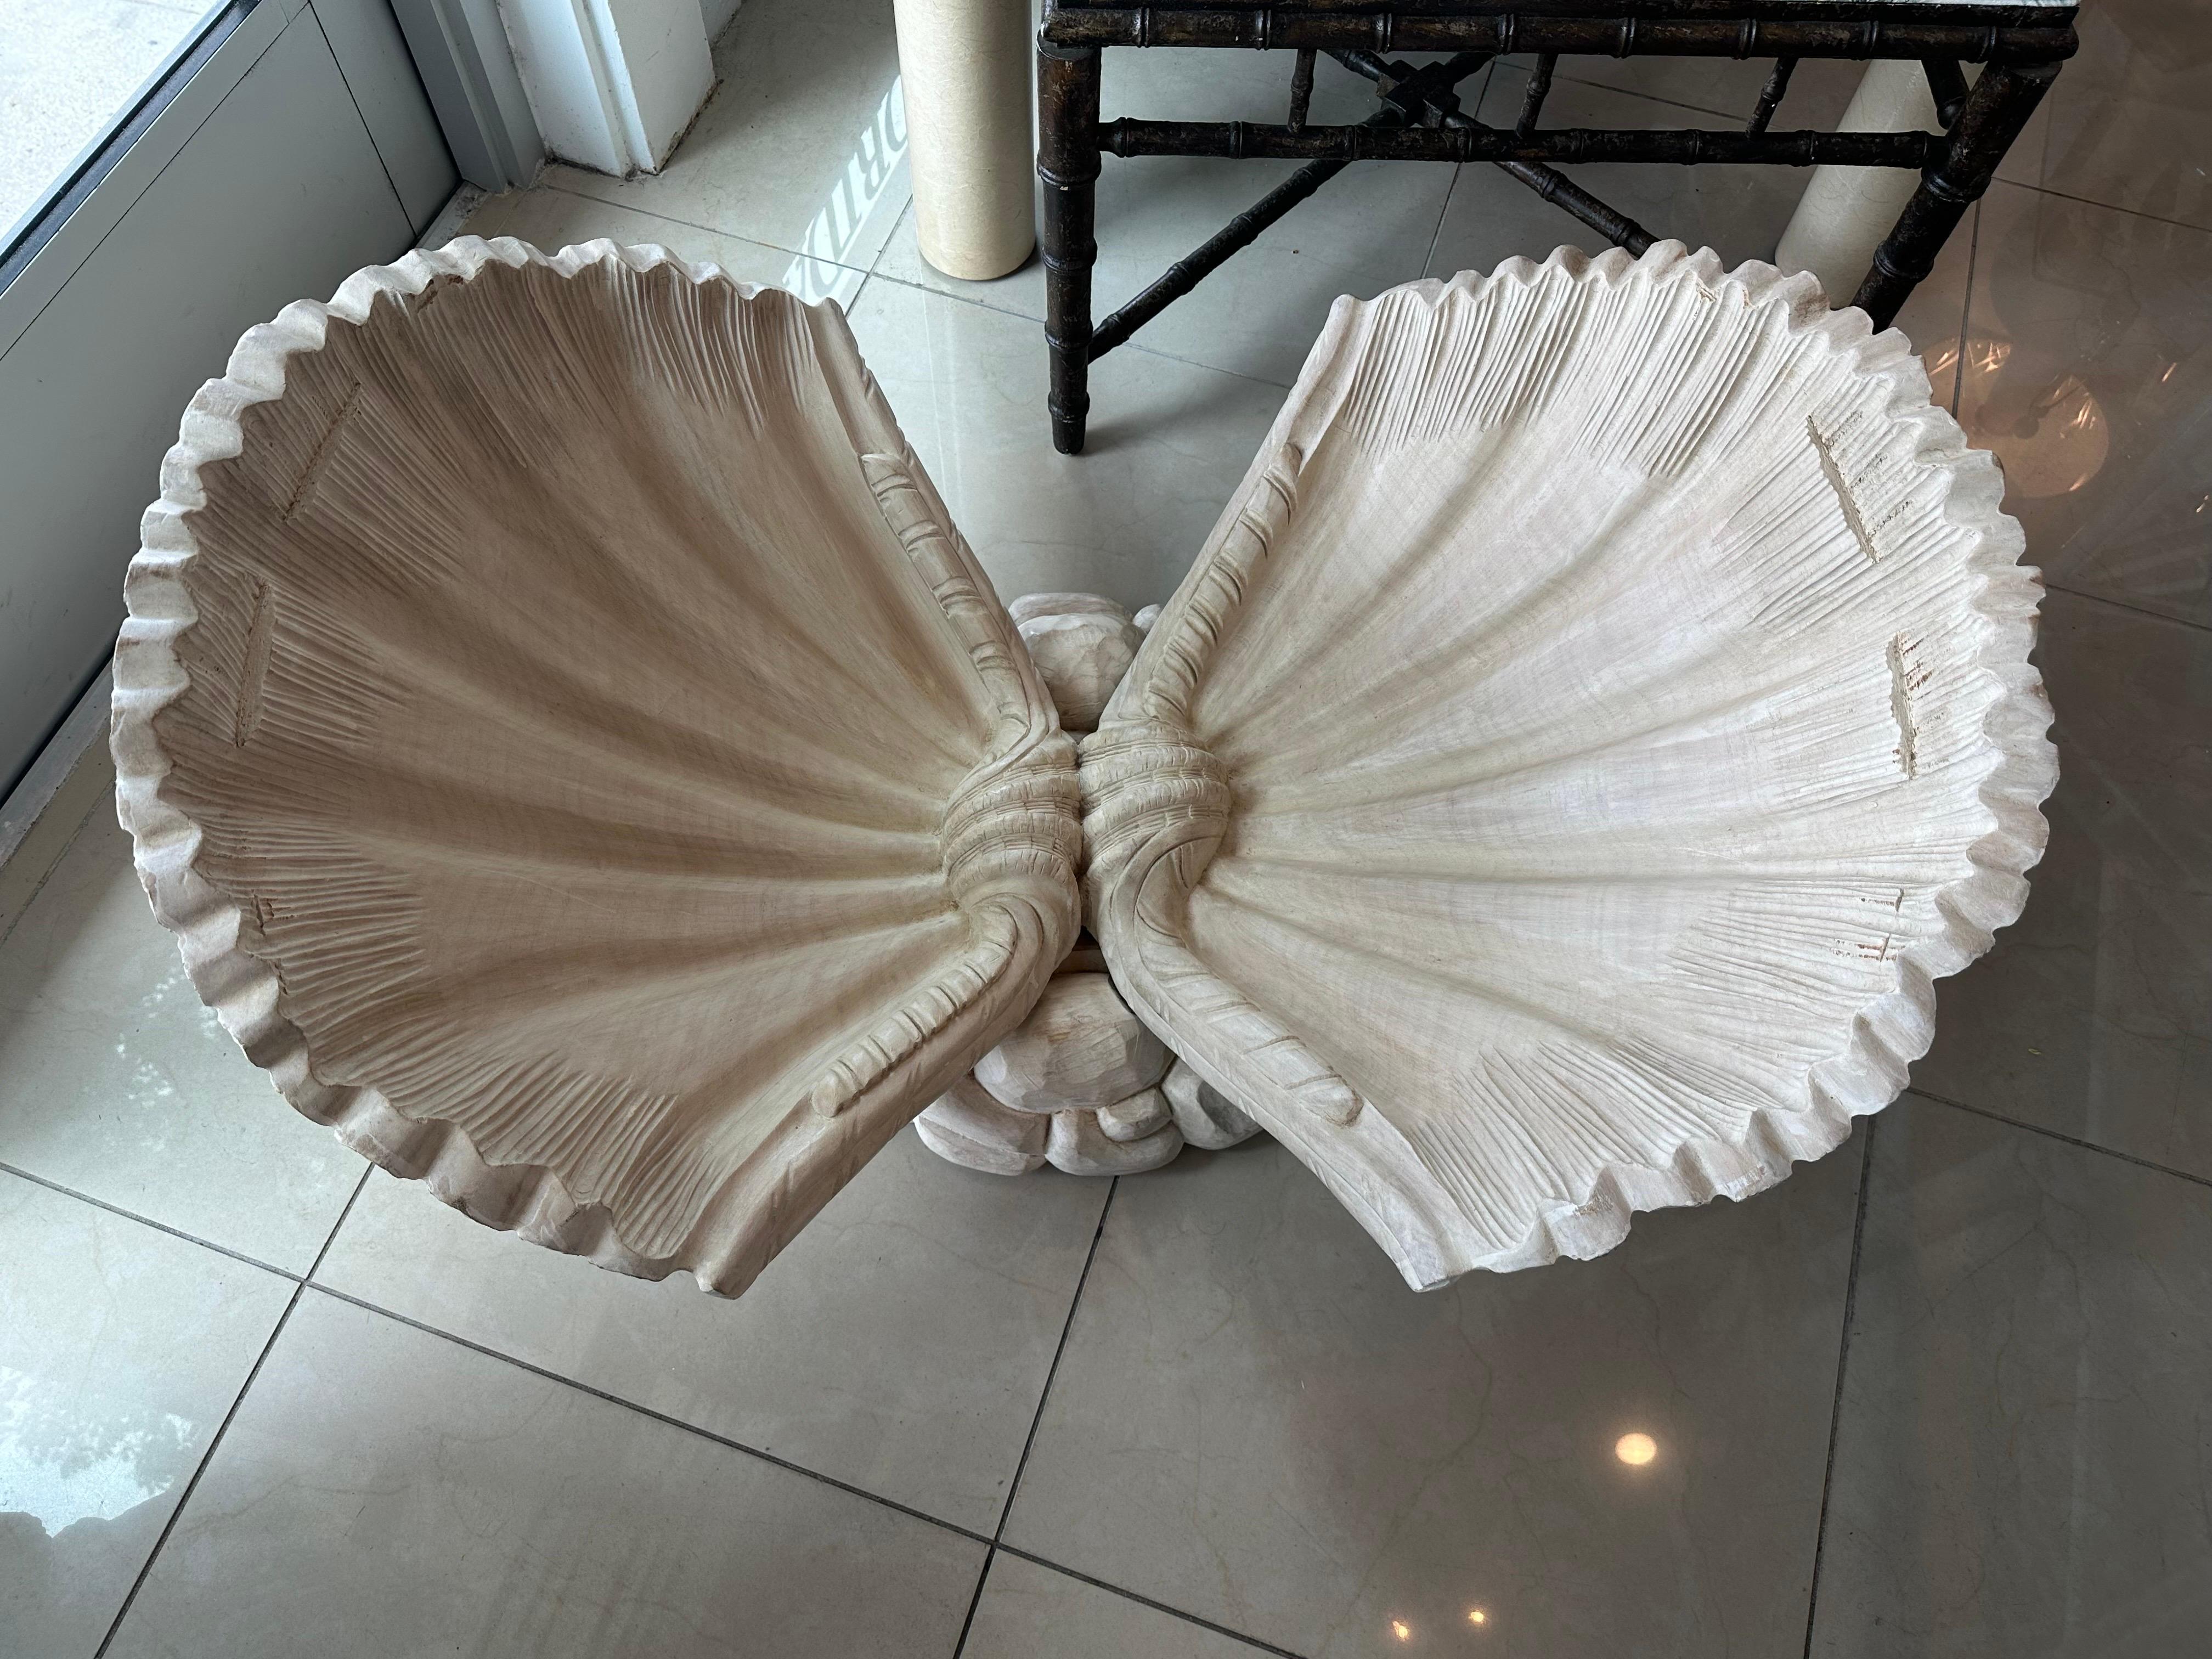 Amazing vintage Italian wood carved scalloped clam shell coffee cocktail table. Original wood finish. Comes with original glass which has some scratches. You may want to replace the glass. Dimensions: 18 H x 39.5 W x 28 D.